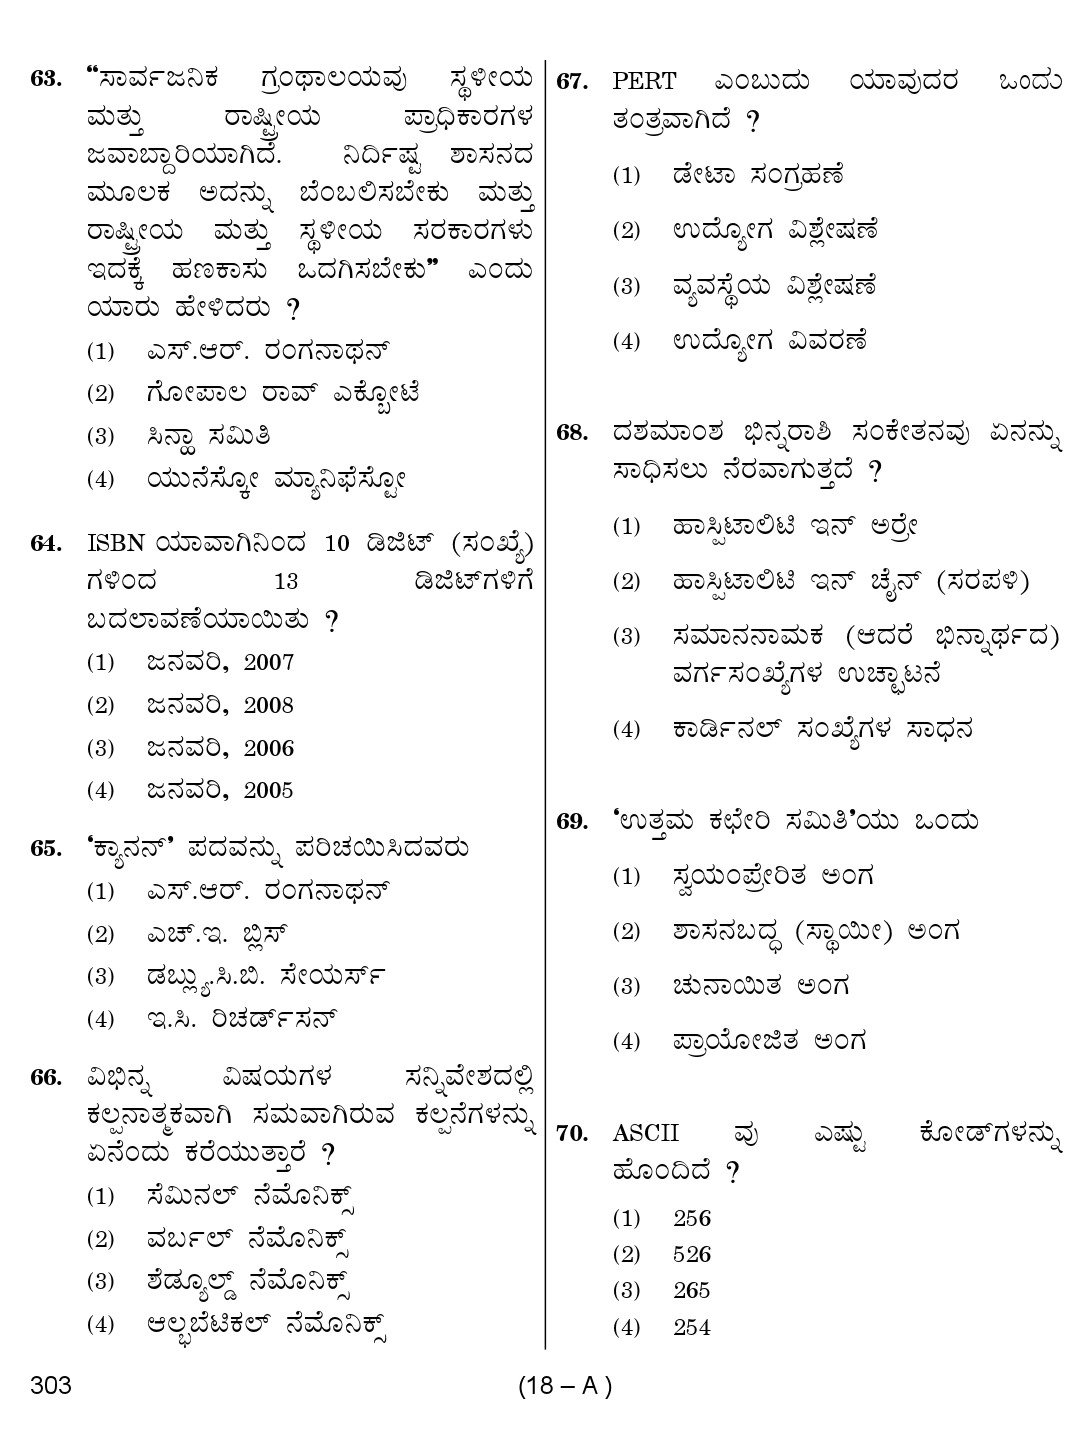 Karnataka PSC 303 Specific Paper II Librarian Exam Sample Question Paper 18